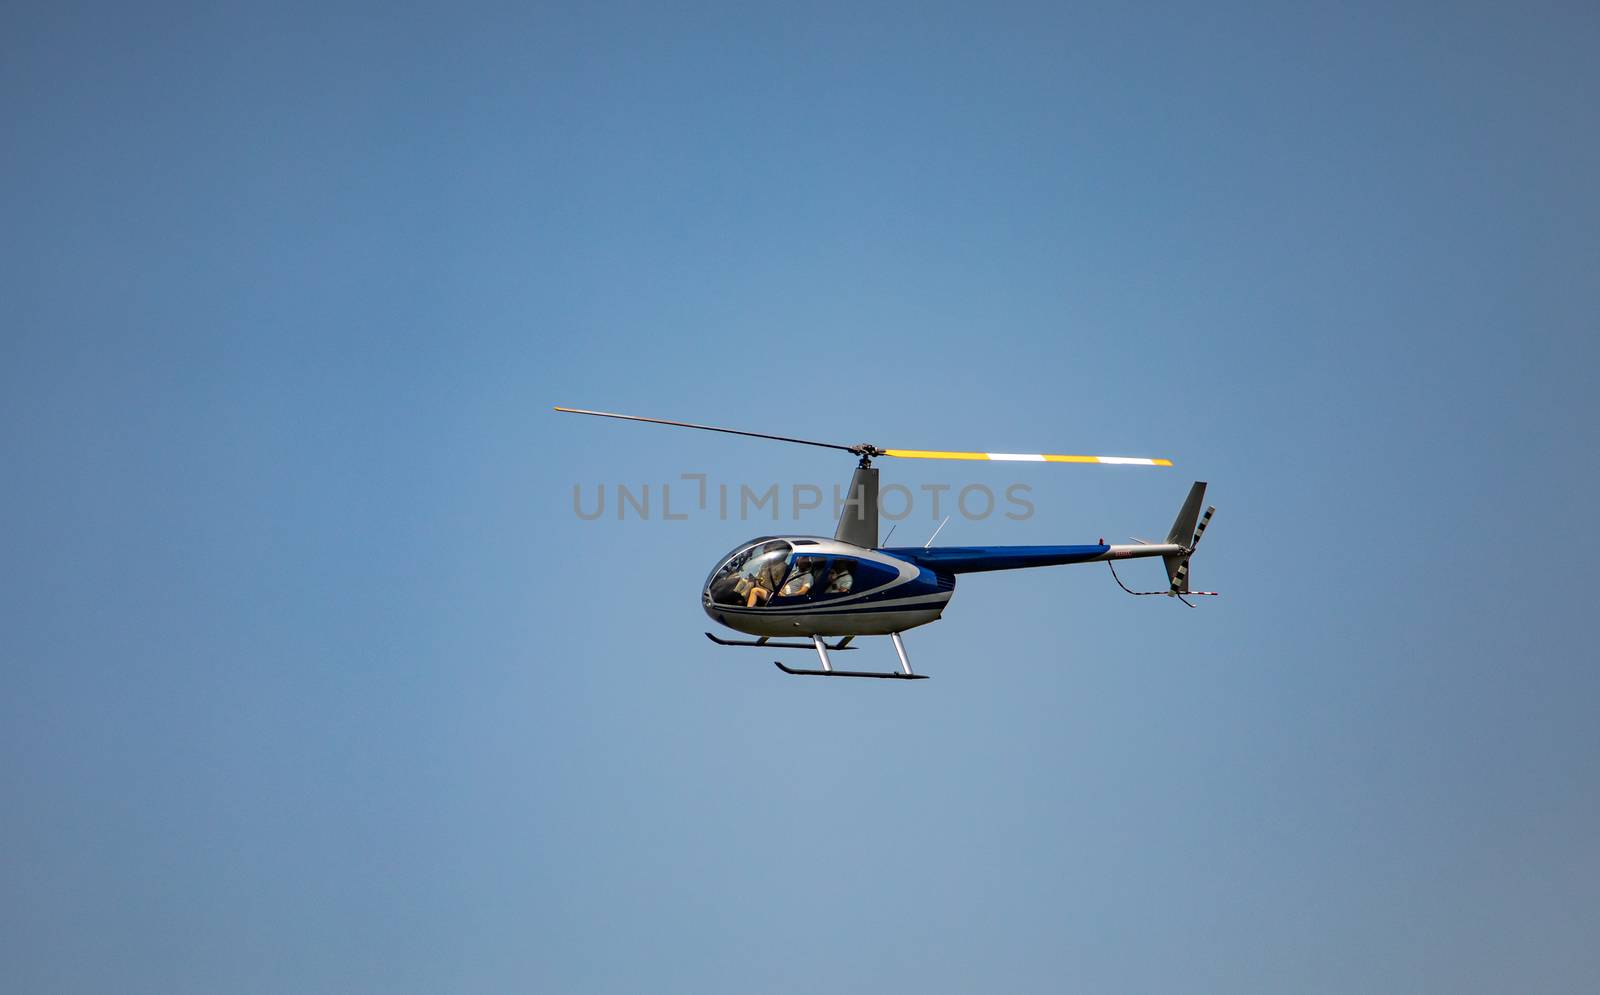 Robinson 44 Raven II helicopter at flight on clear blue sky by mkenwoo